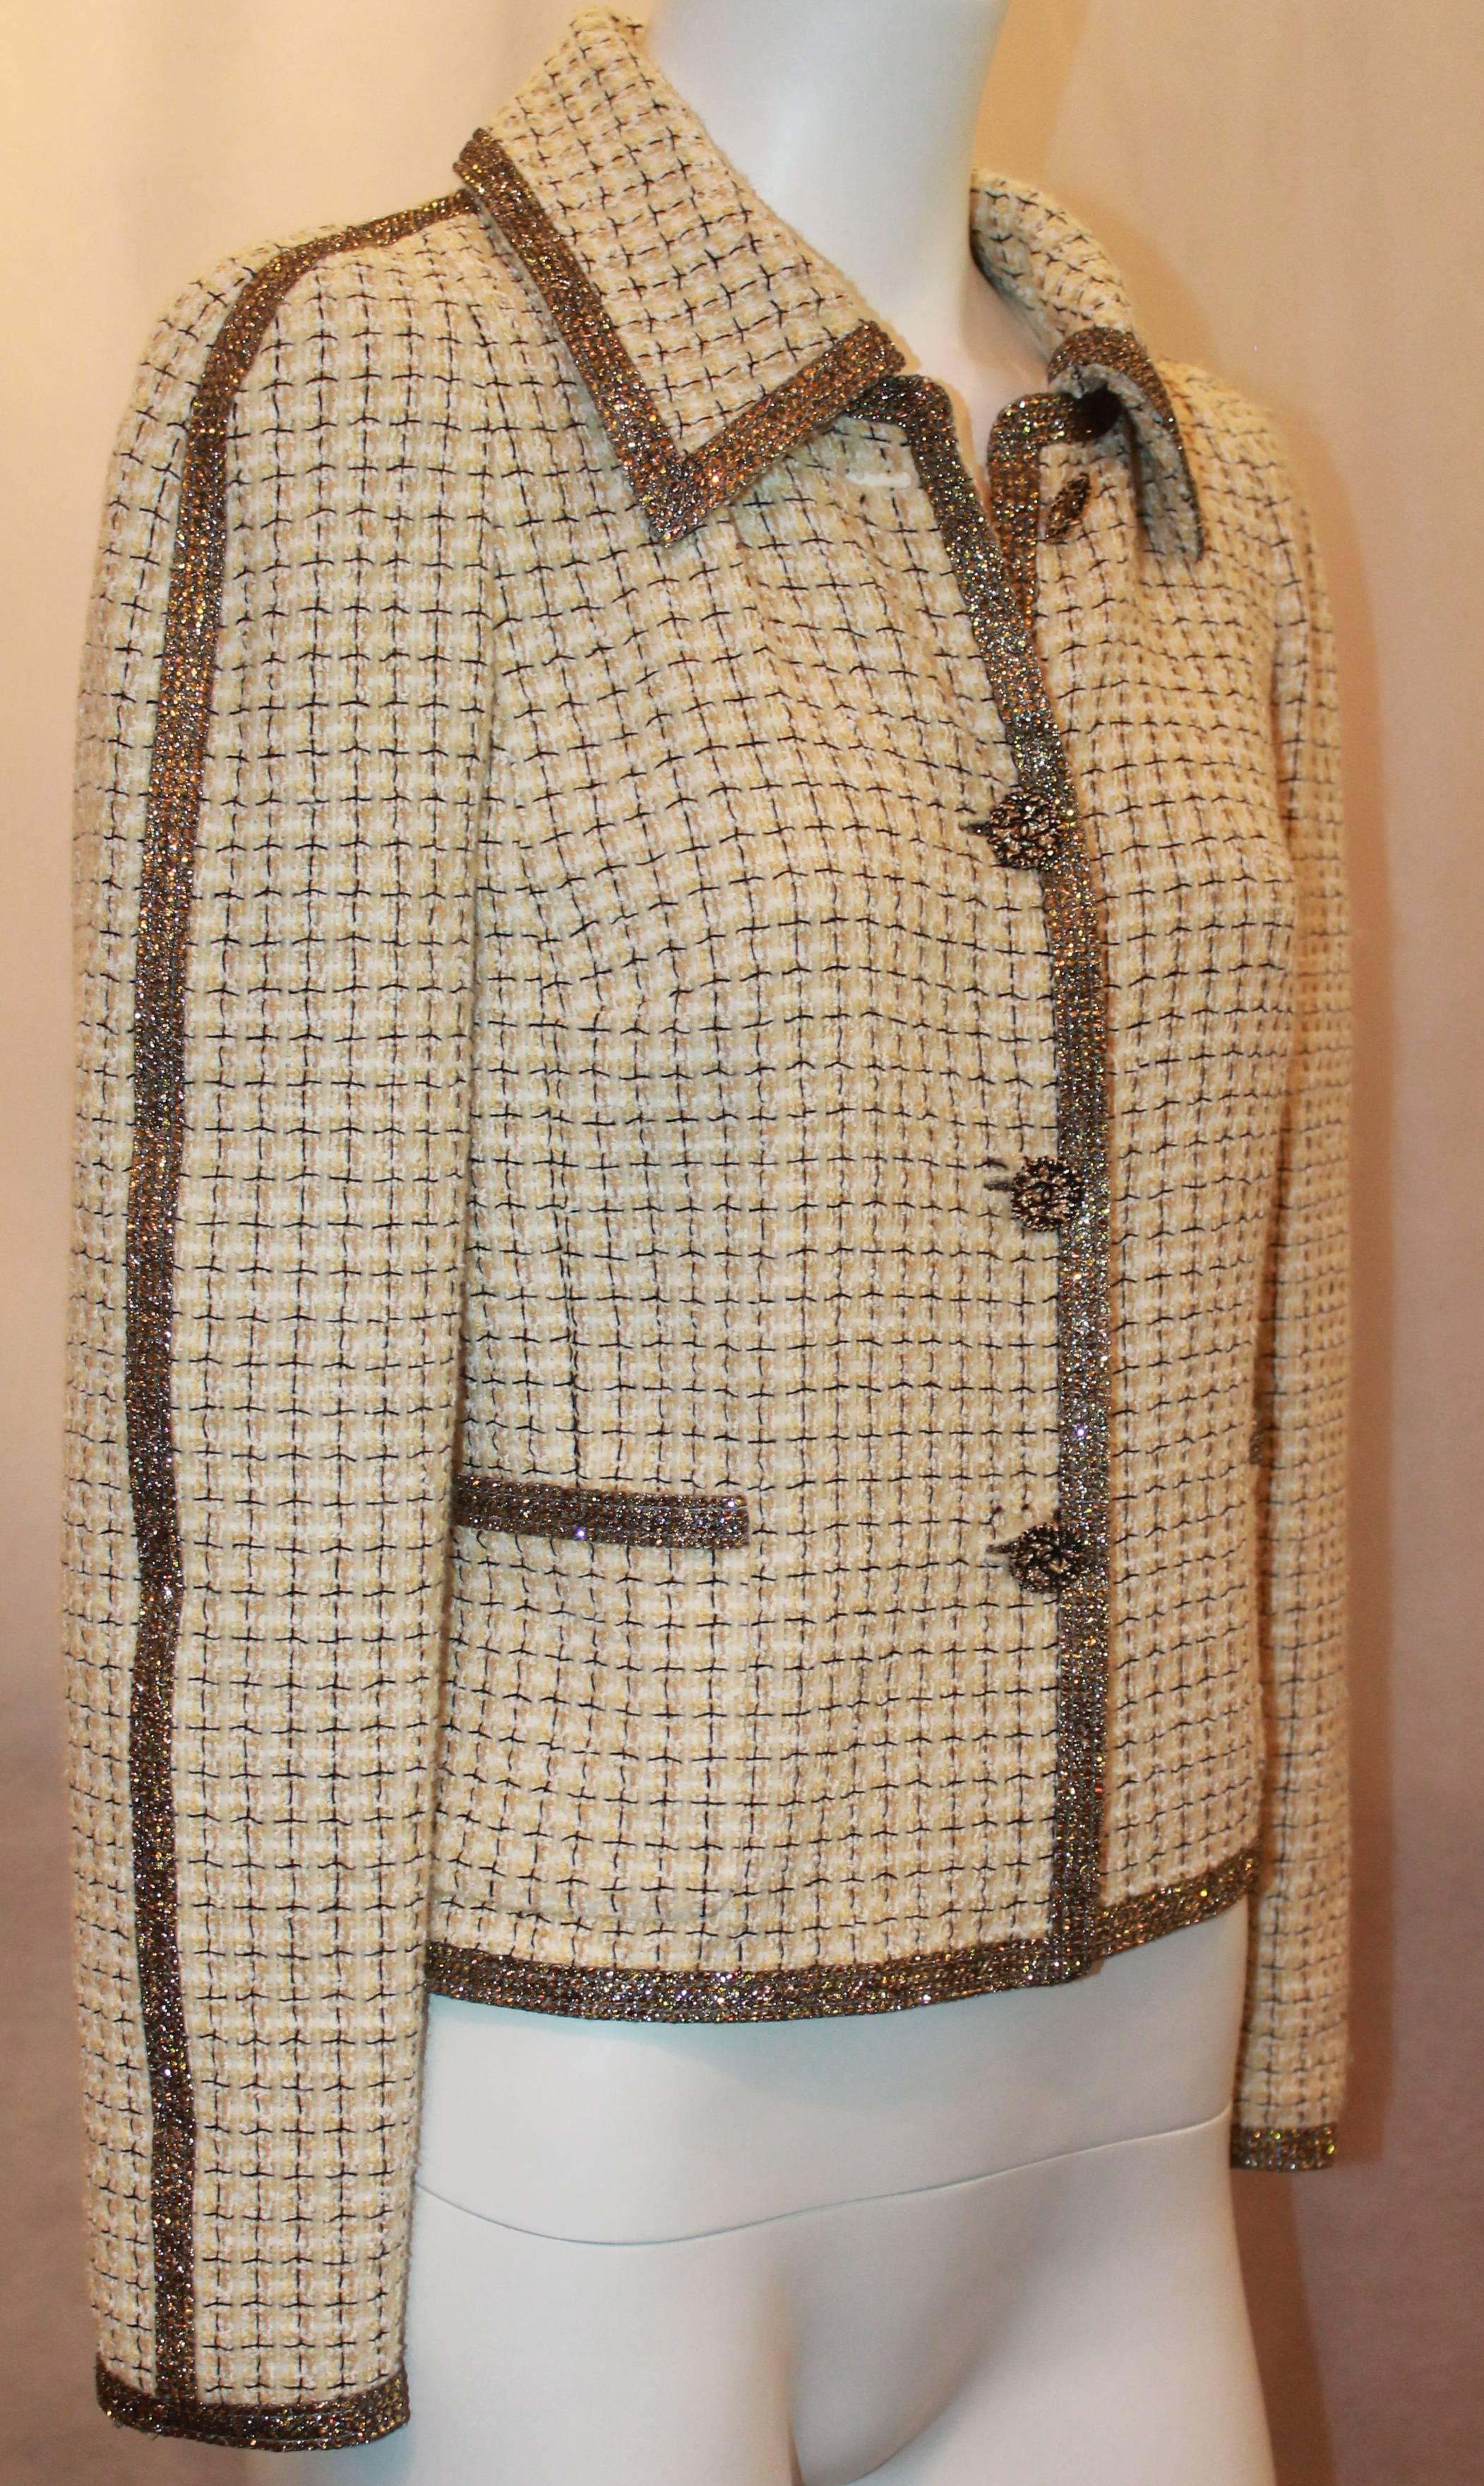 Chanel Ivory & Yellow Tweed Checkered Jacket w/ Topaz Colored Rhinestones - 36.  This beautifully unique Chanel jacket is in excellent condition.  It features a topaz colored rhinestone trim, a collar, two front pockets, and black enamel 